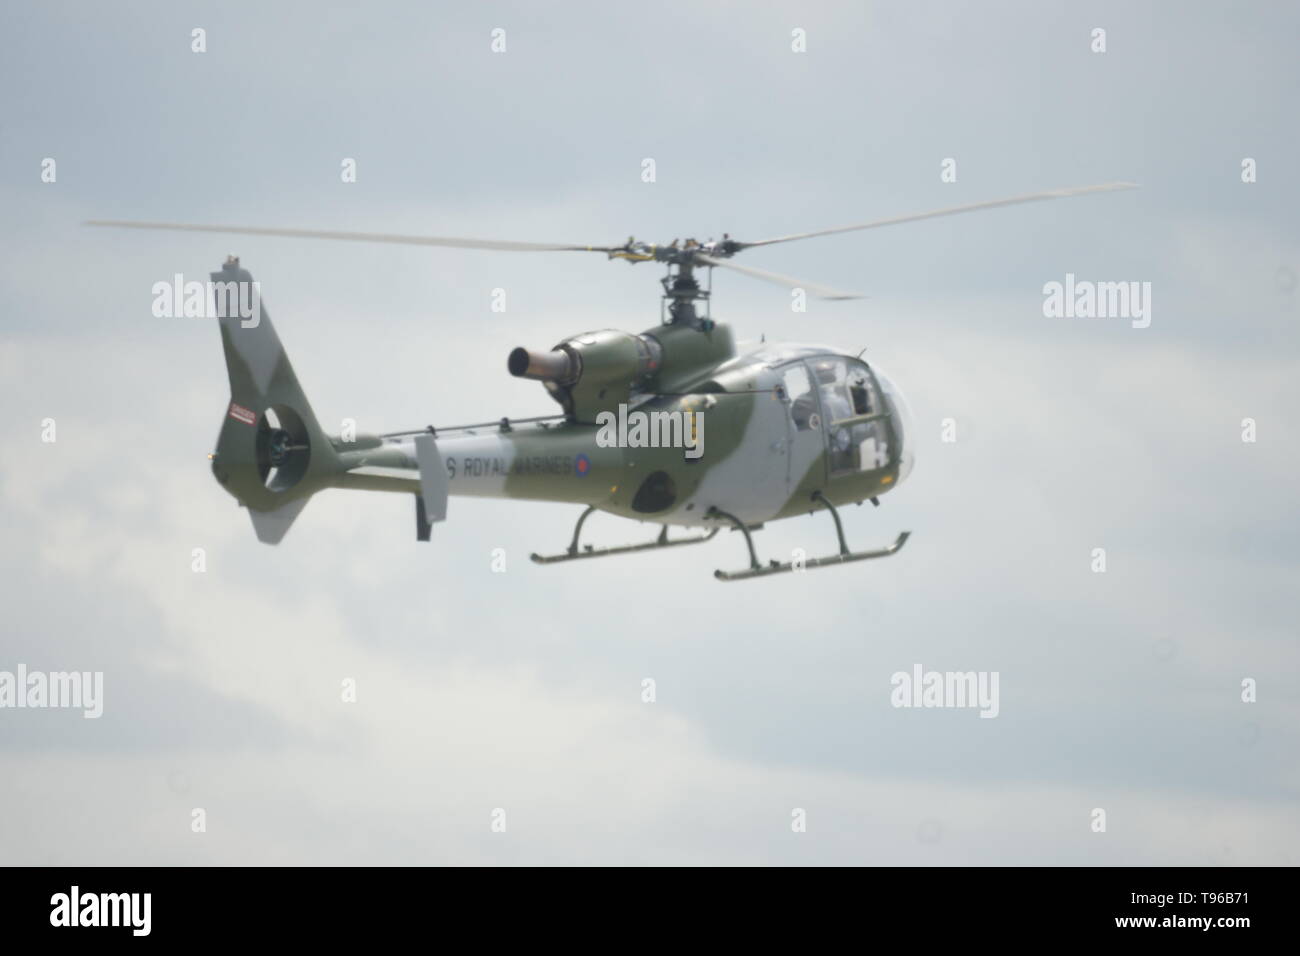 British Army Army Air Corps Westland Gazelle Helicopter XZ334 Editorial  Stock Image Image Of Gazelle, Chopper: 121459139, Gazelle Helicopter Army  Air Corps